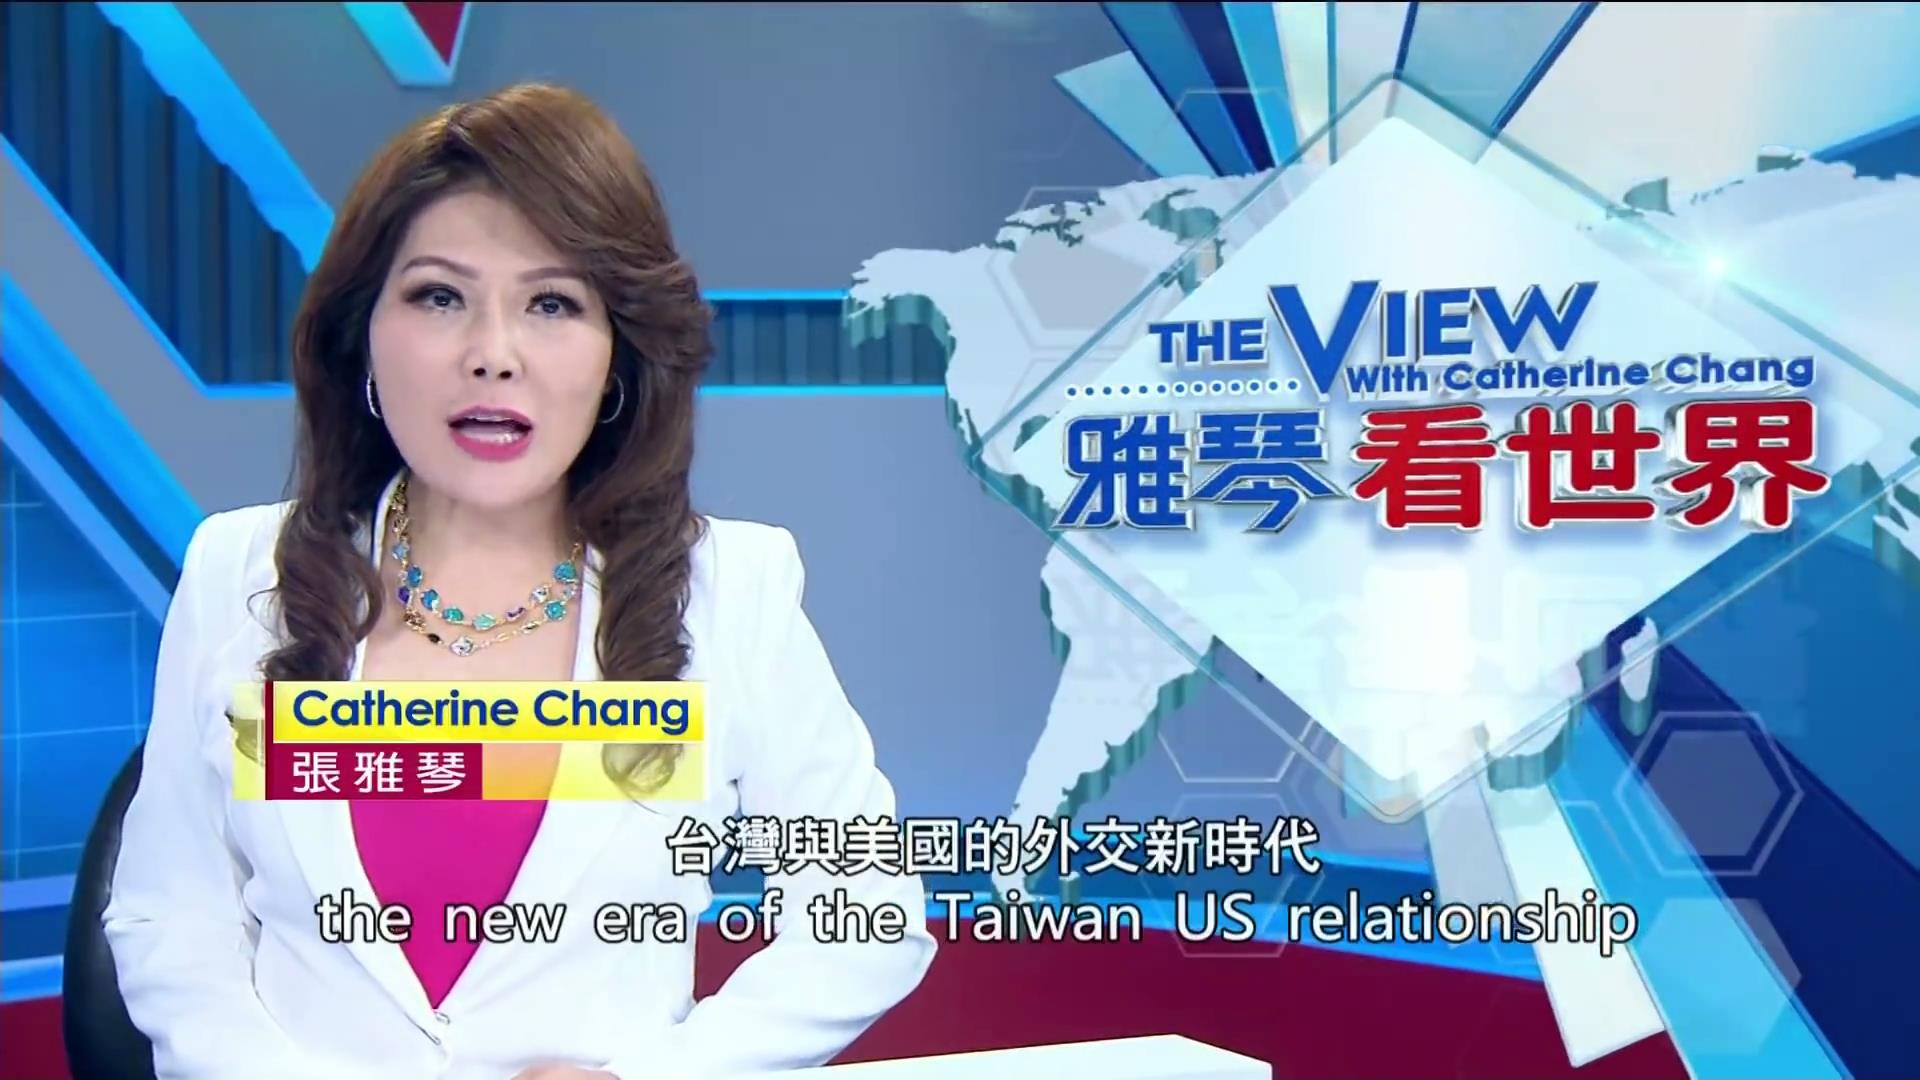 Catherine Chang Discusses Keith Krach visit on Taiwan’s “The View”